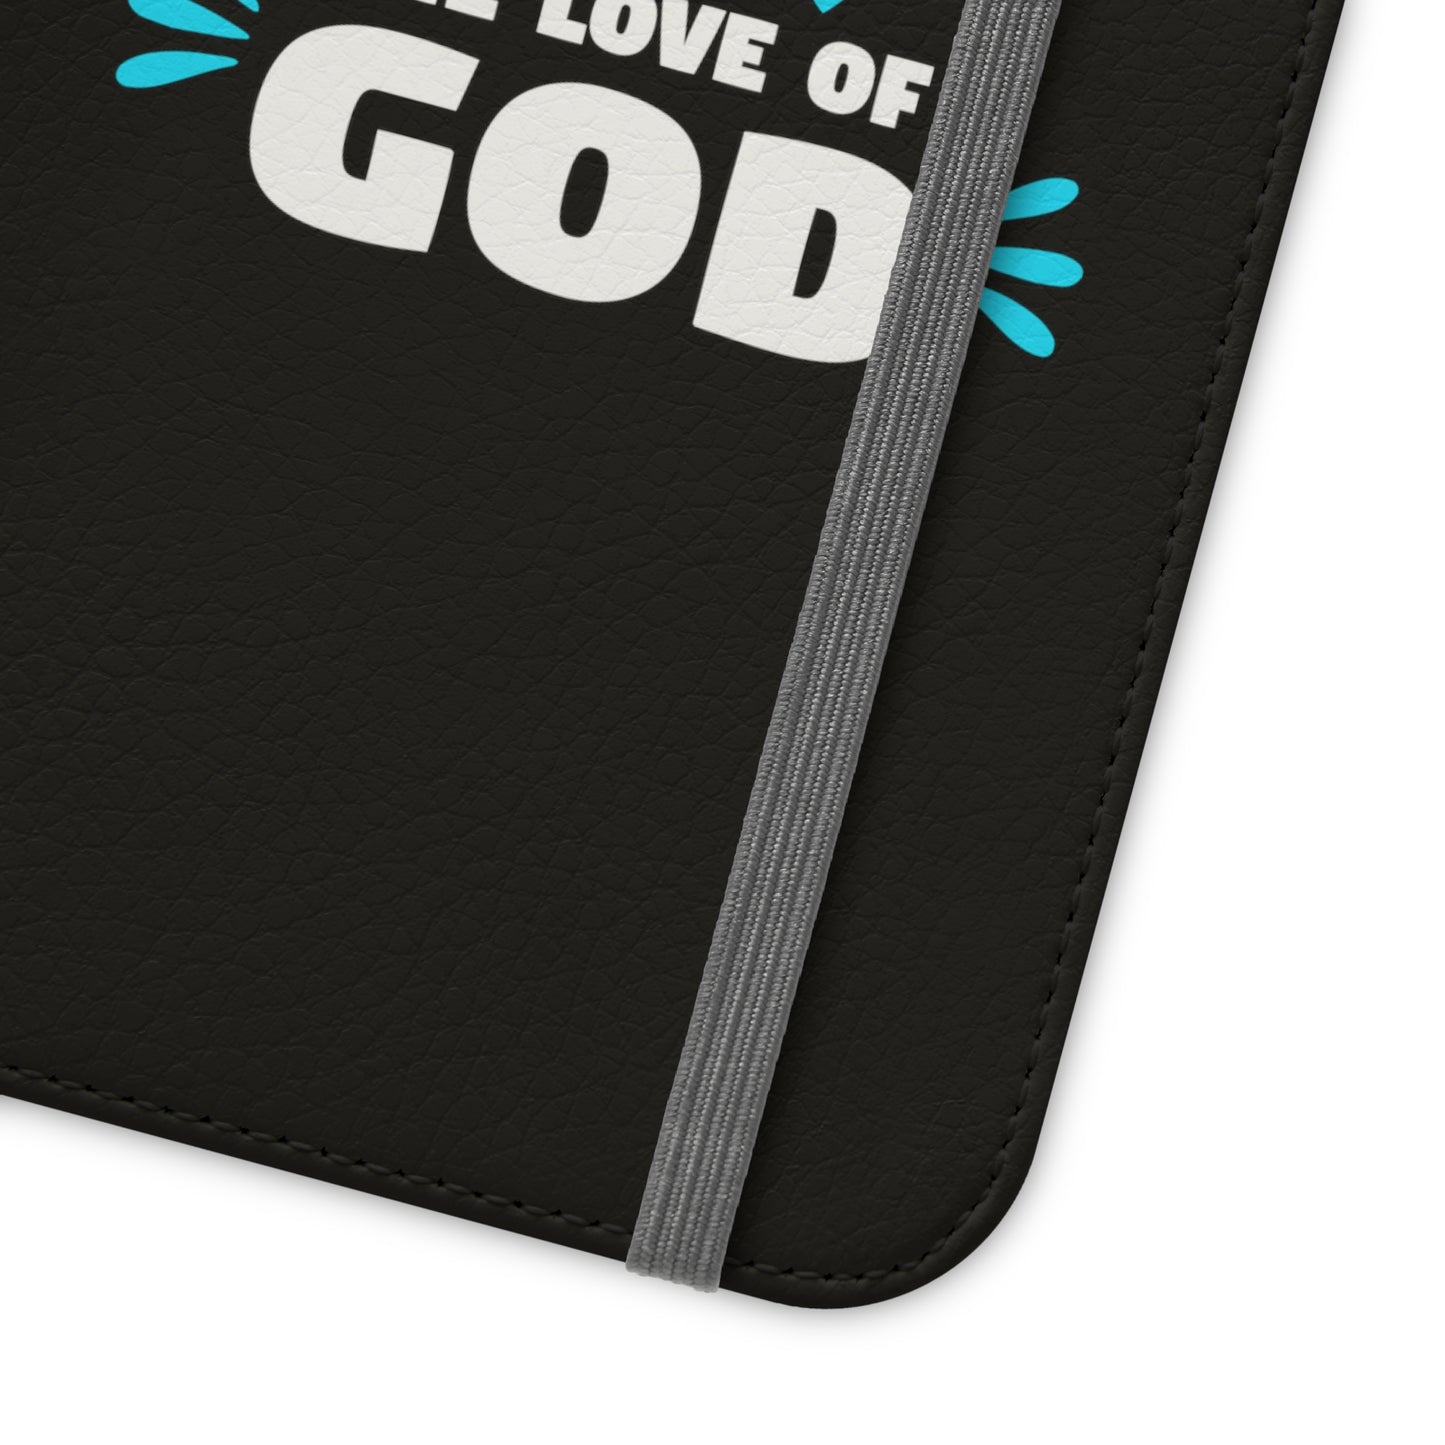 No Greater Love Do I Know But The Love Of God Phone Flip Cases